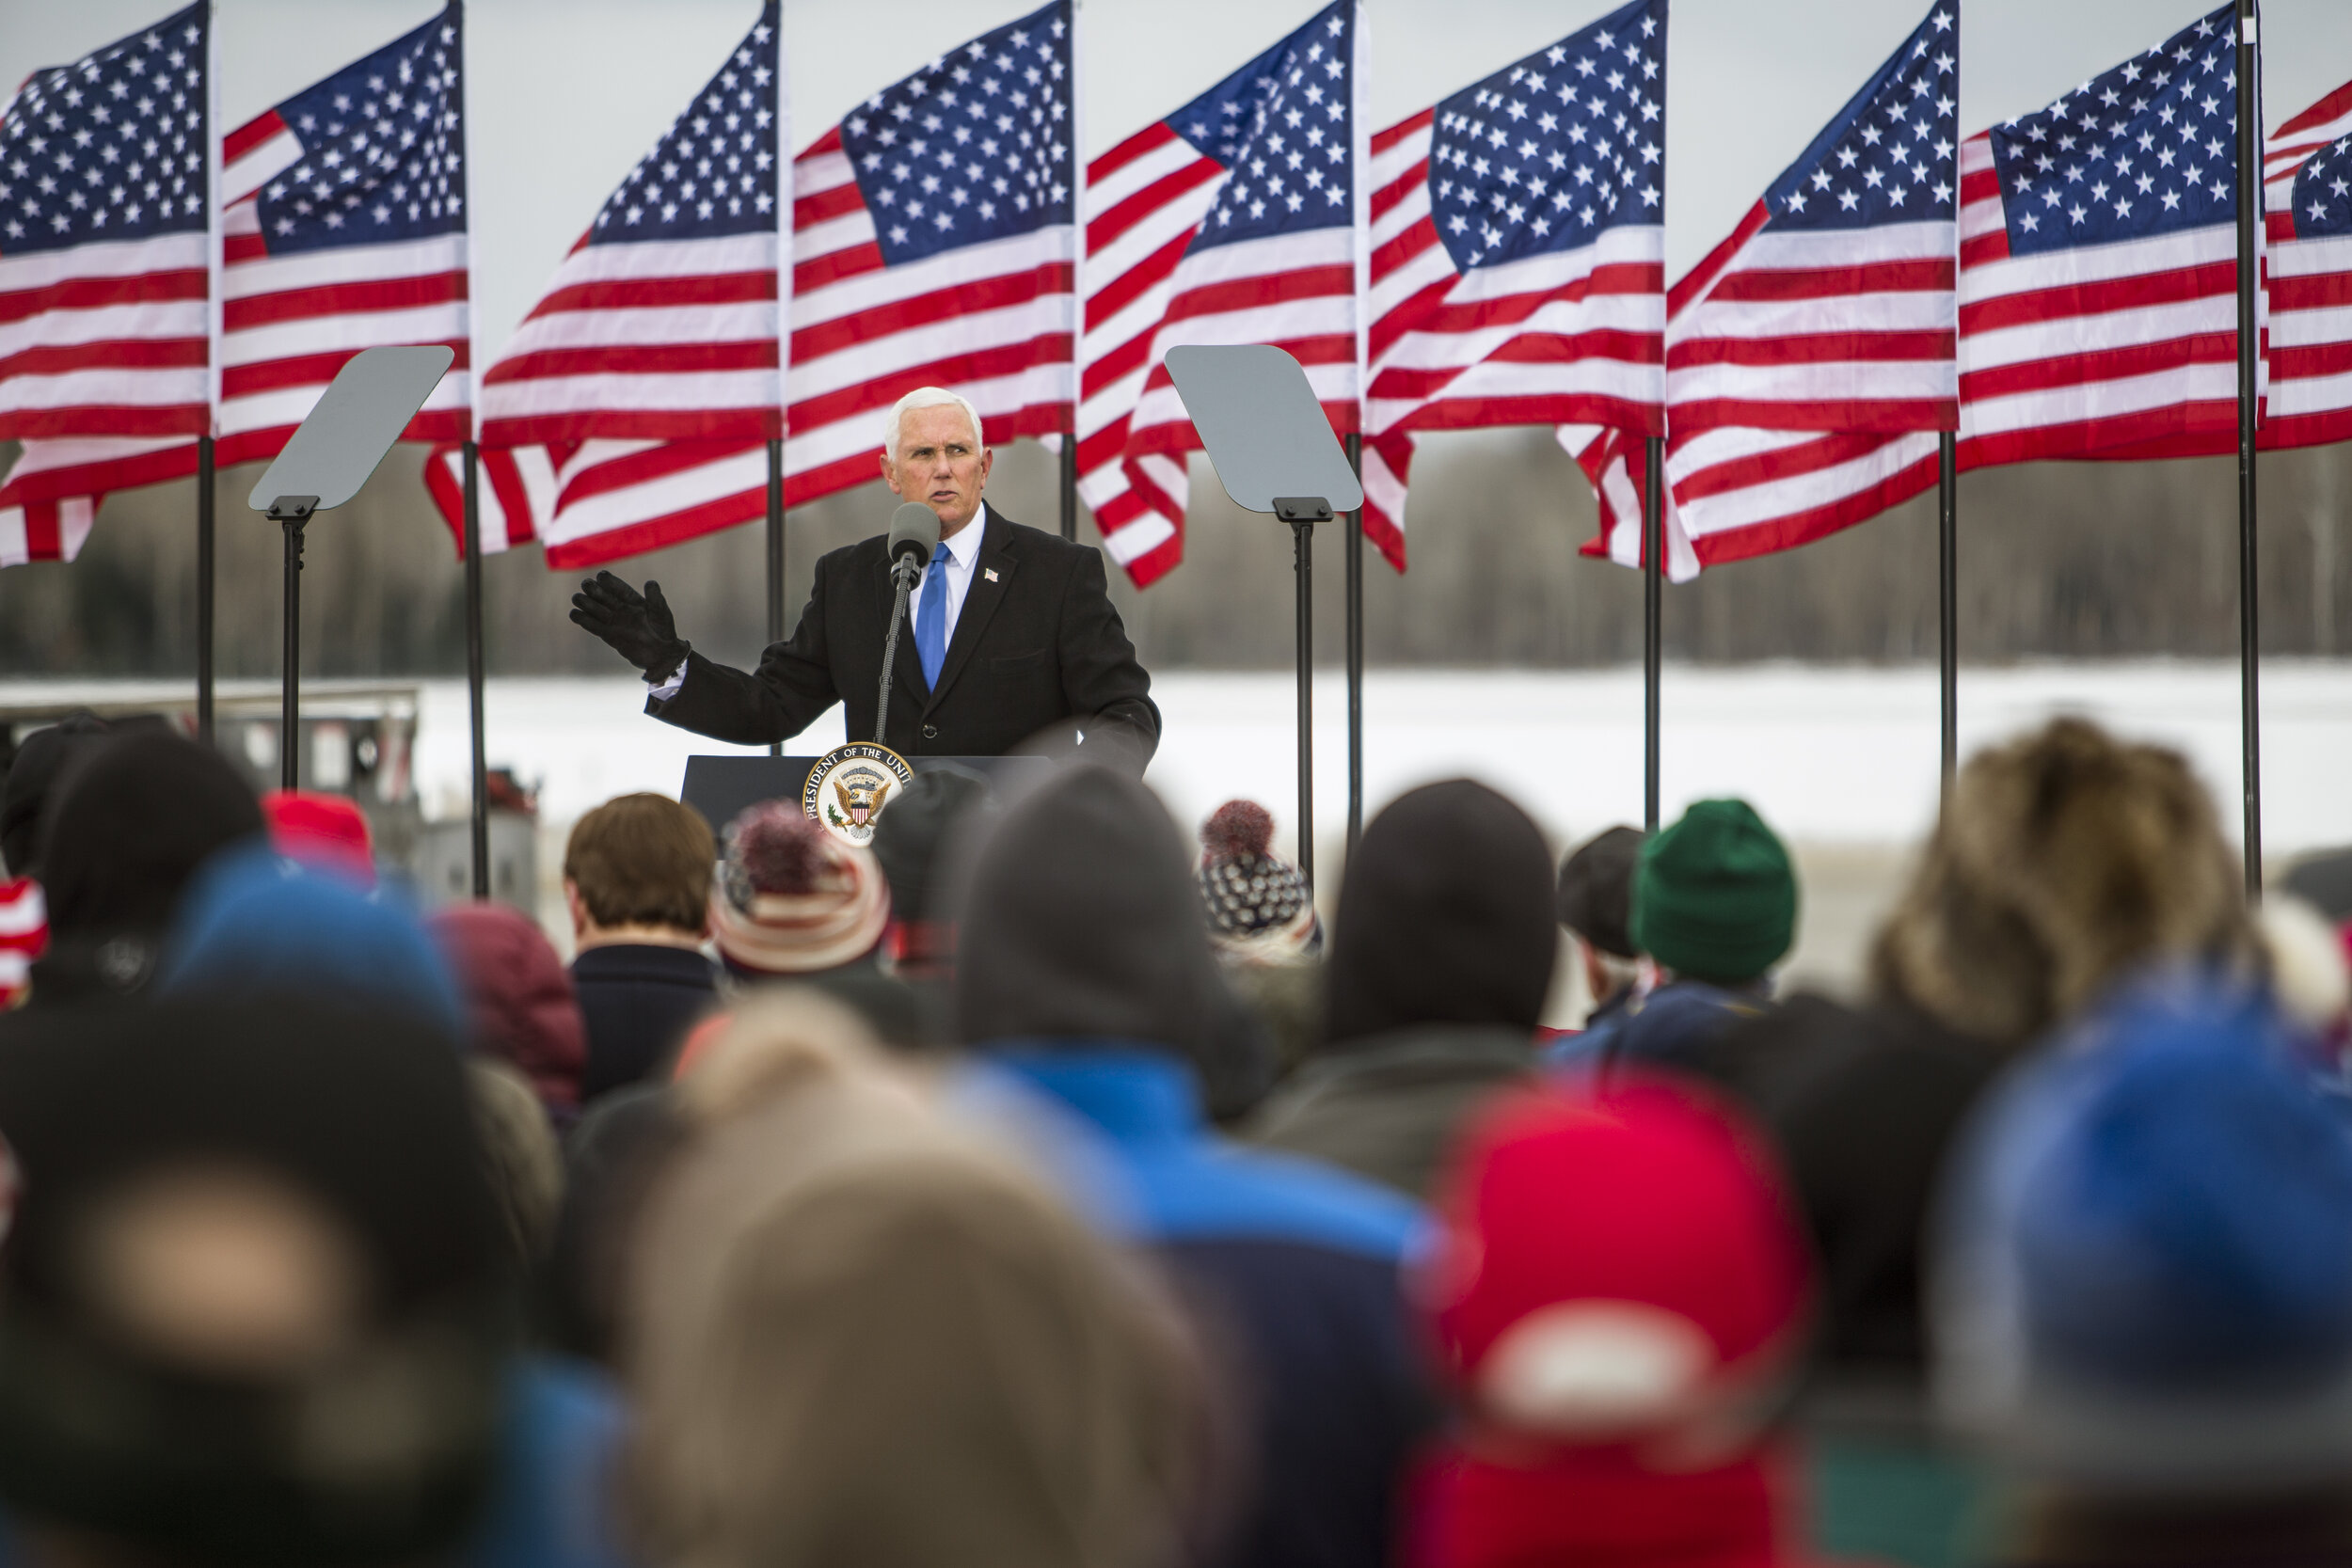  Vice President Mike Pence addresses a large crowd during a rally on the Iron Range in Hibbing, Minnesota on October 26, 2020  (Photo by Brooklynn Kascel/Getty Images) 